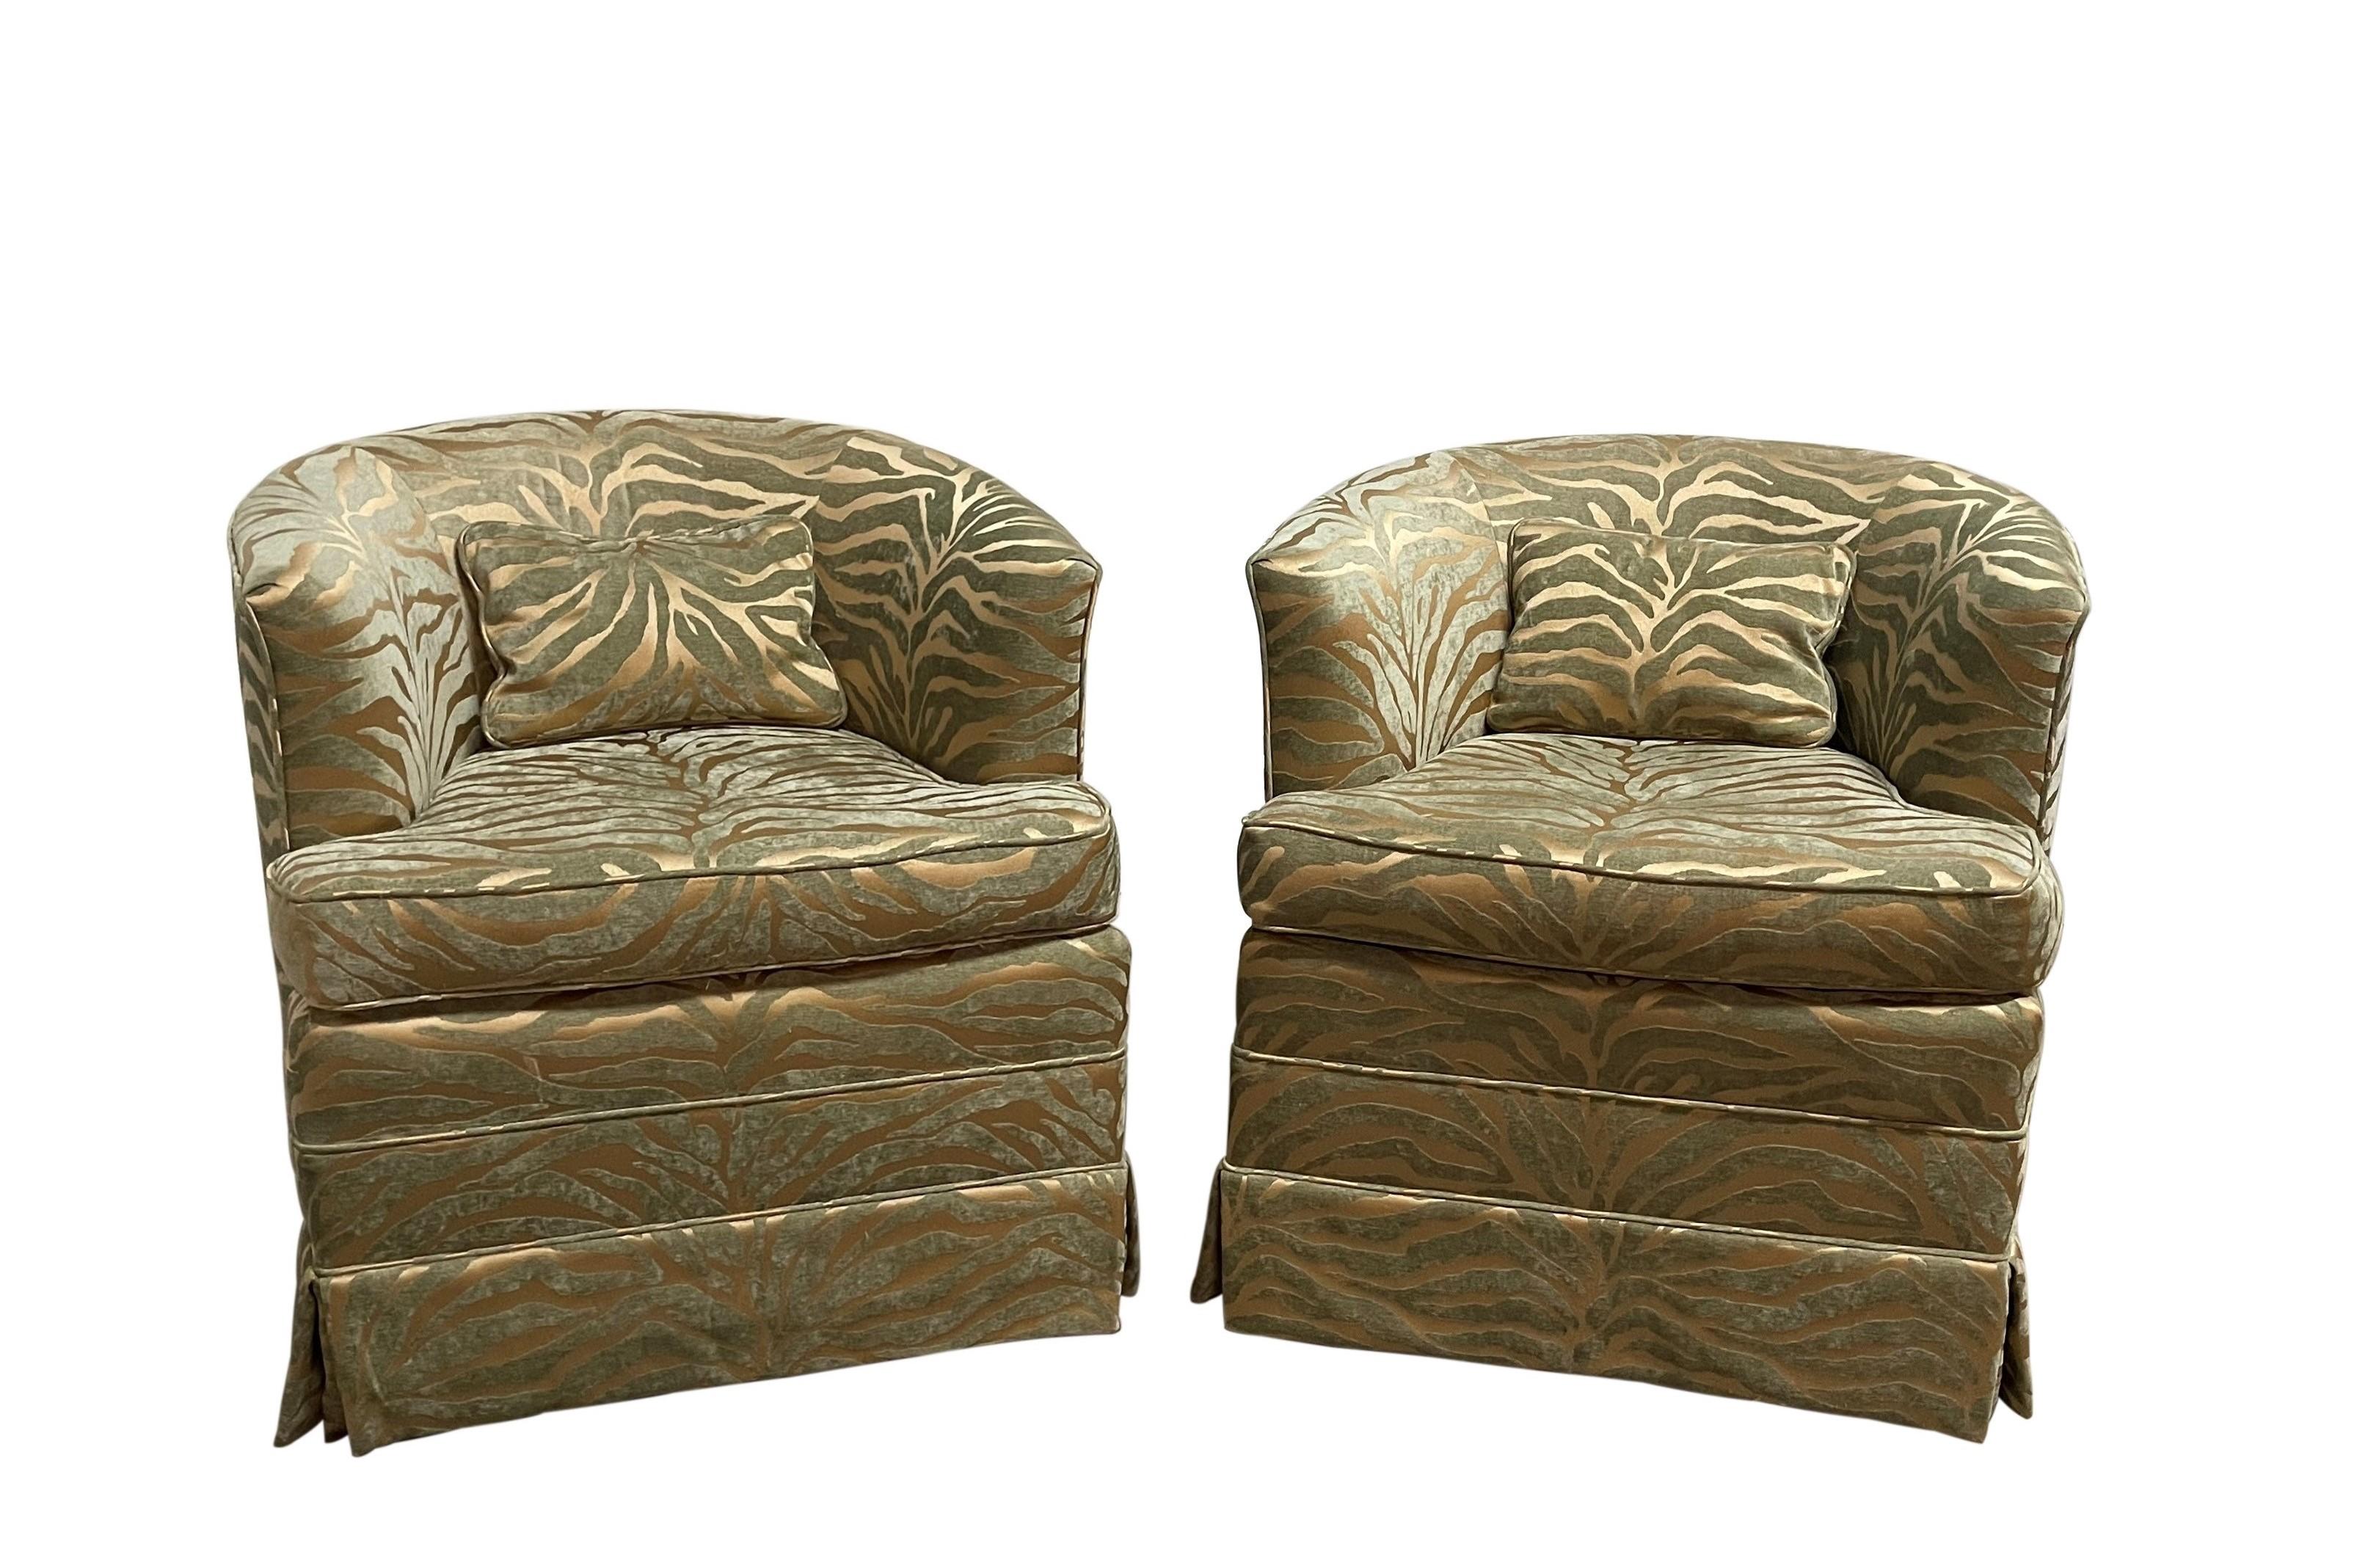 Two fabulous Milo Baughman style barrel back lounge chairs. Modernist swivel chairs upholstered in a bold raised velvet, has a striking luxurious shimmer. A skirt covers a four legged, metal base with a swivel top. Stylish and ideal seating suited